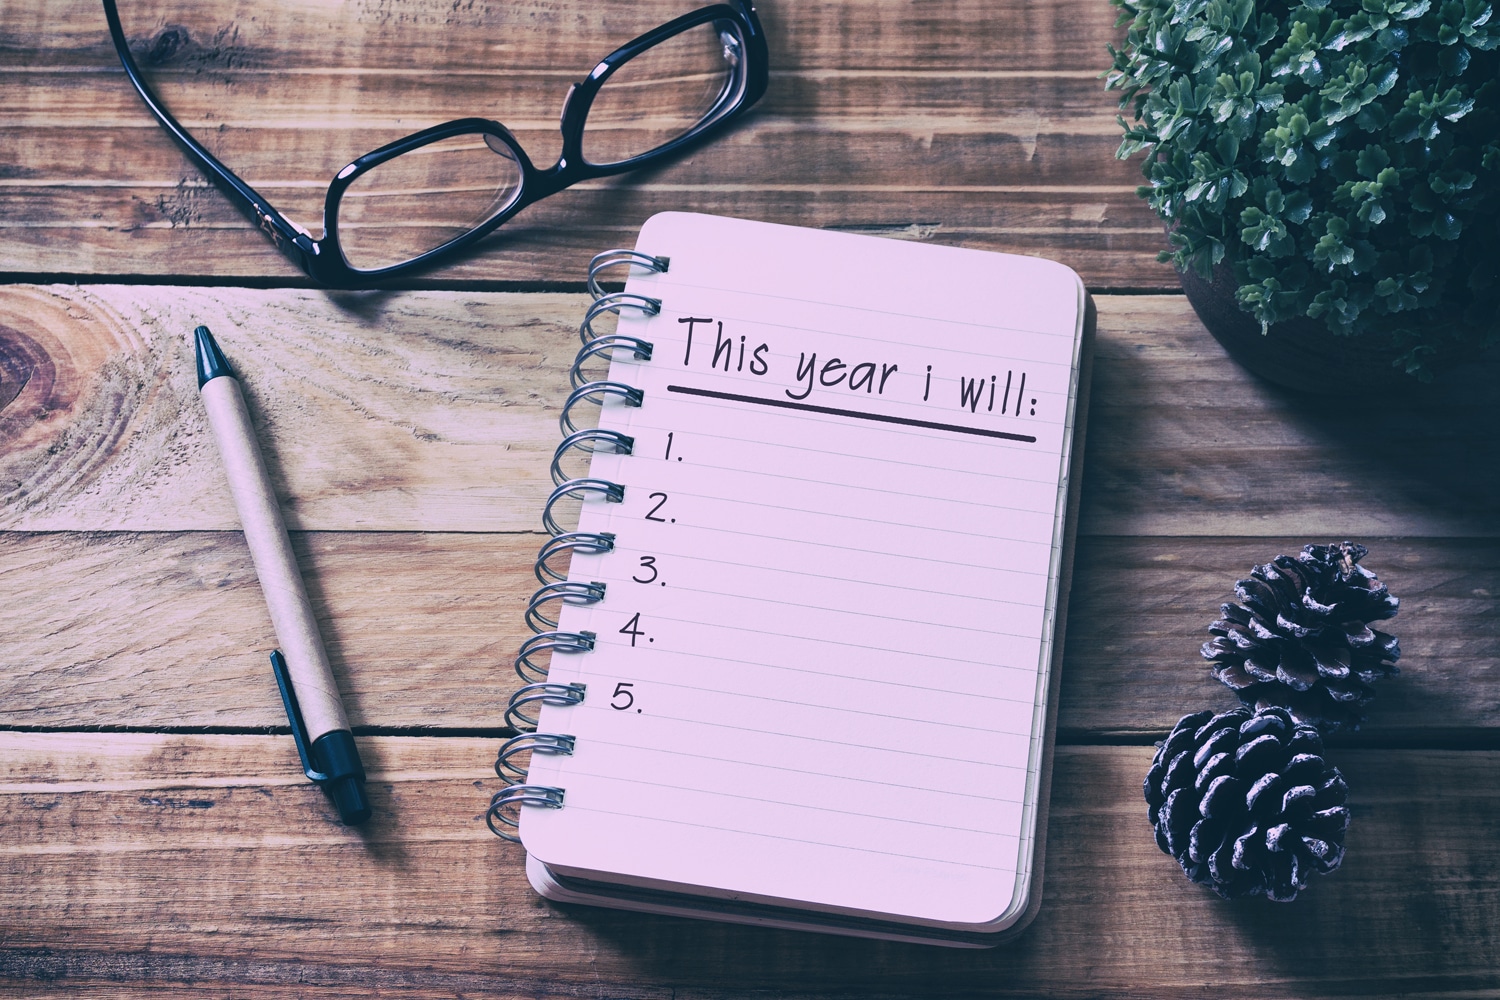 The Promise of New Year’s Resolutions